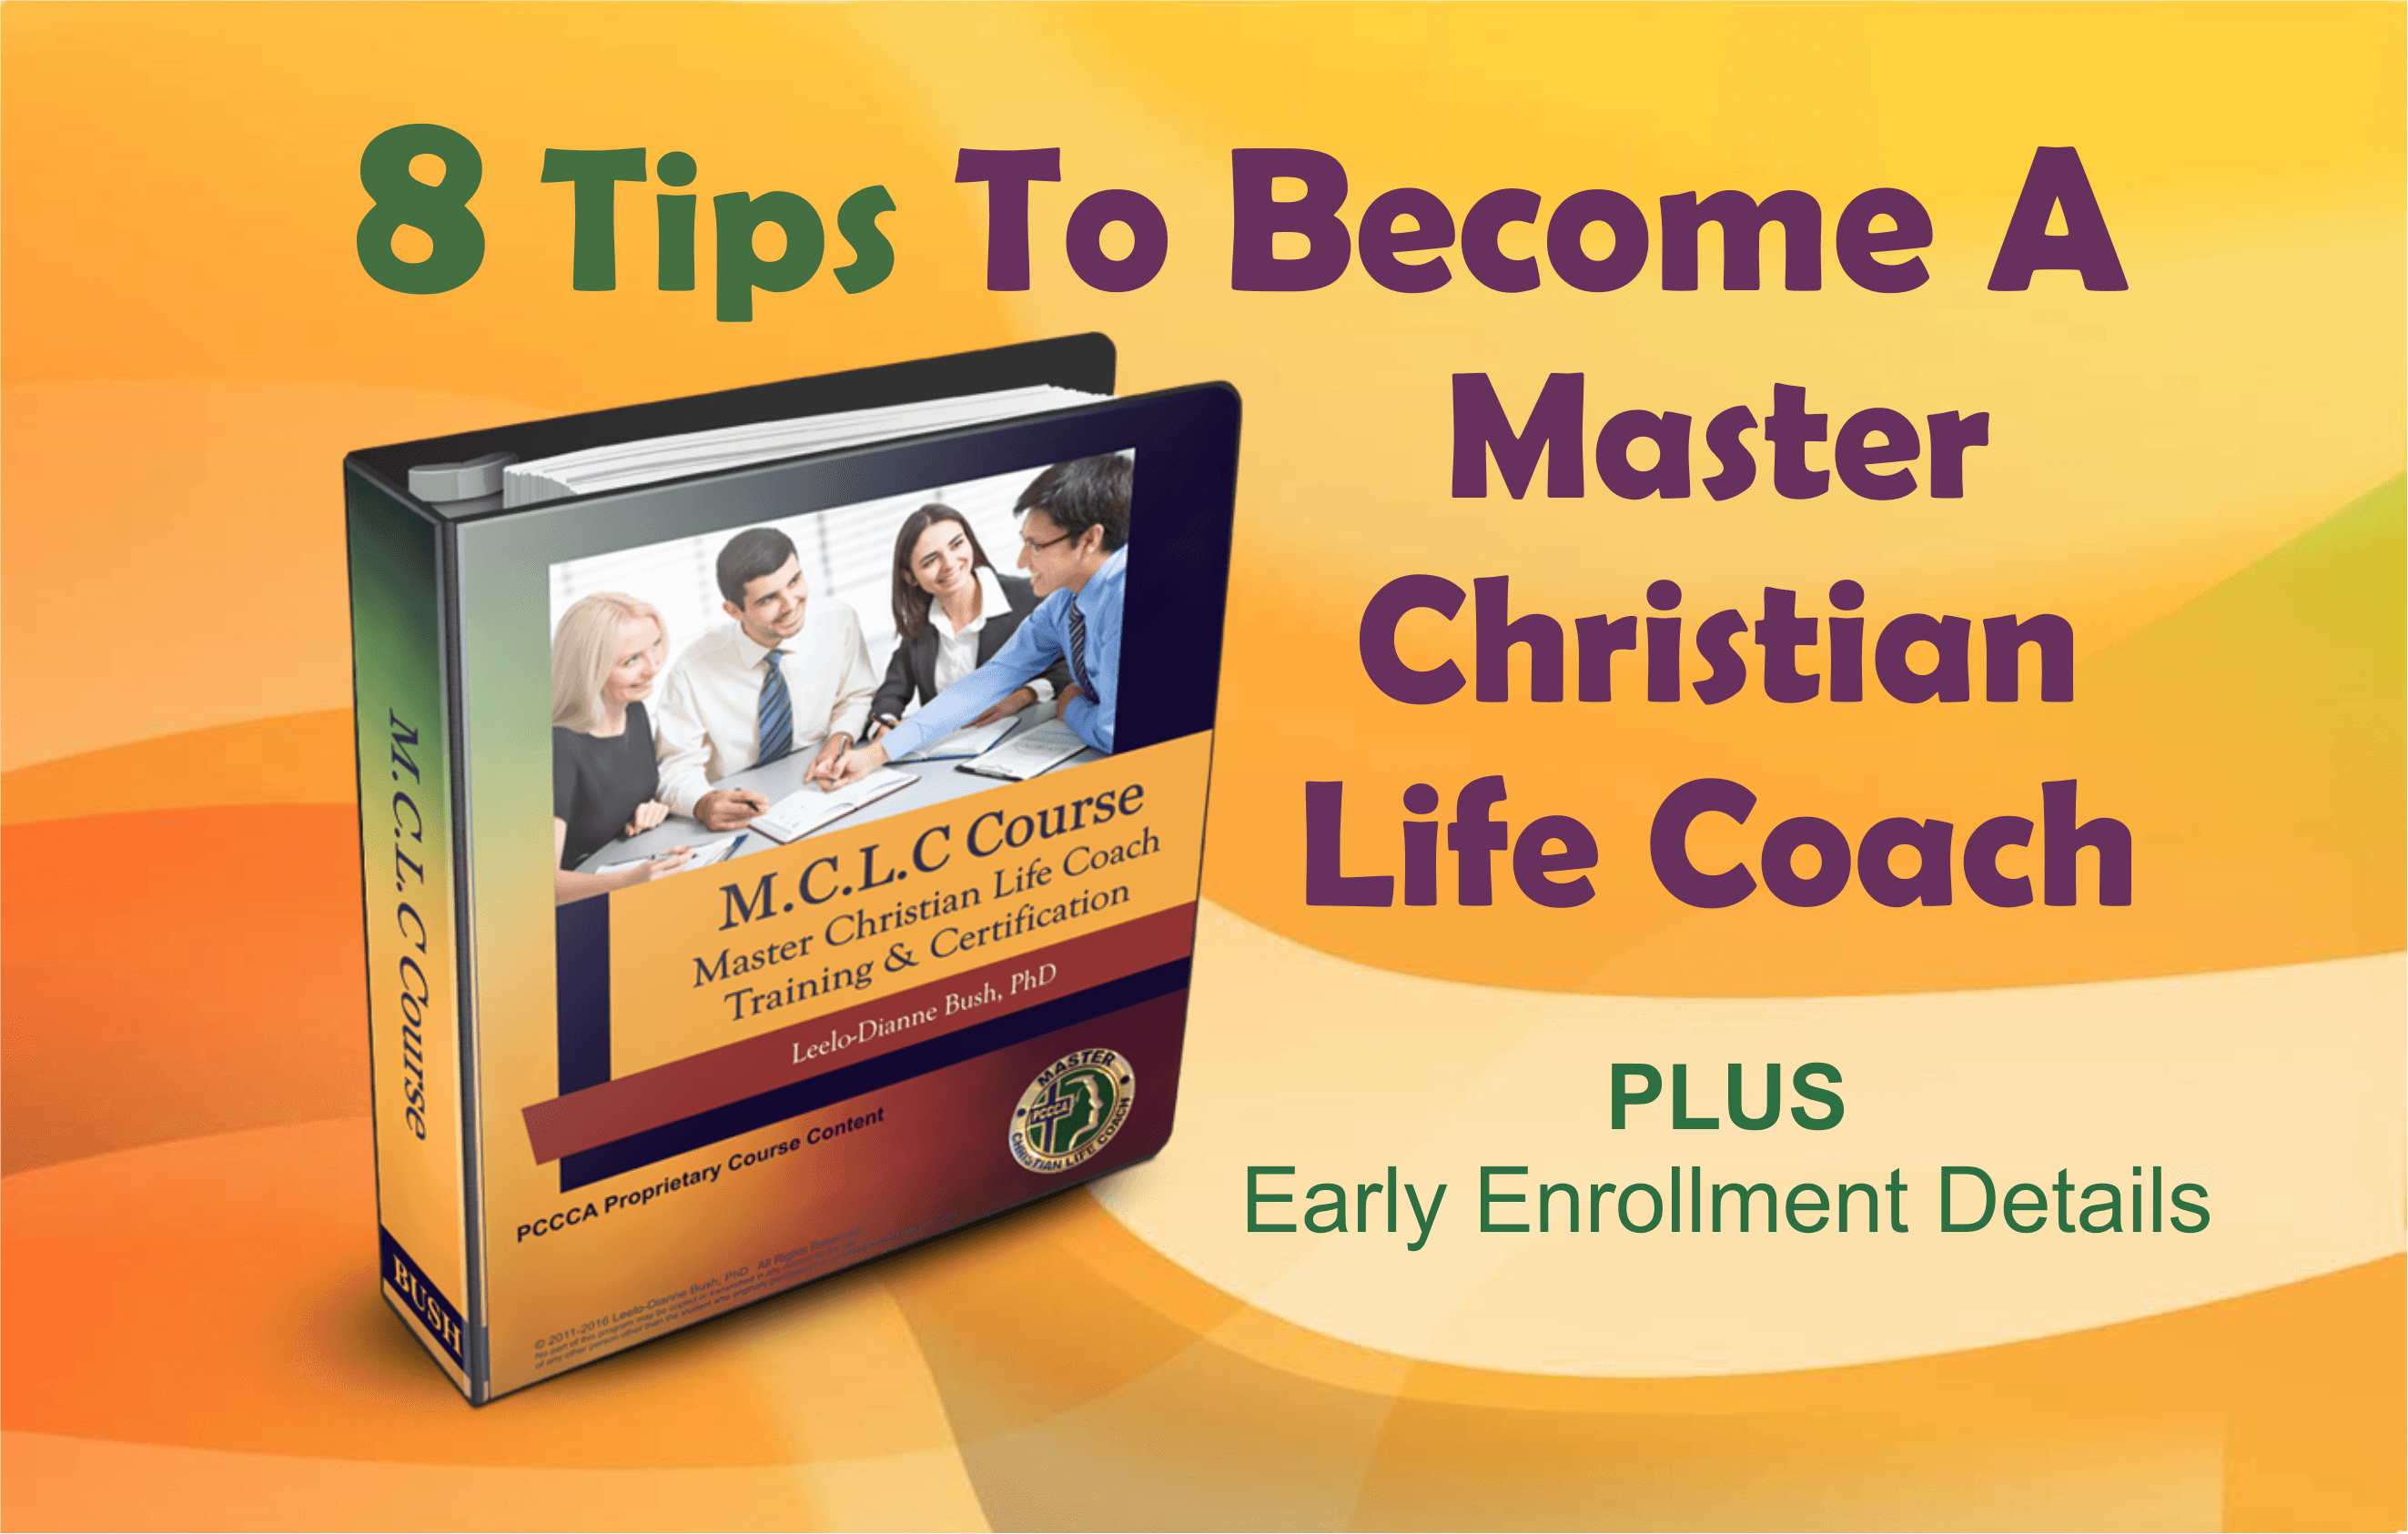 8 Tips to become a Master Christian Life Coach https://pccca.org